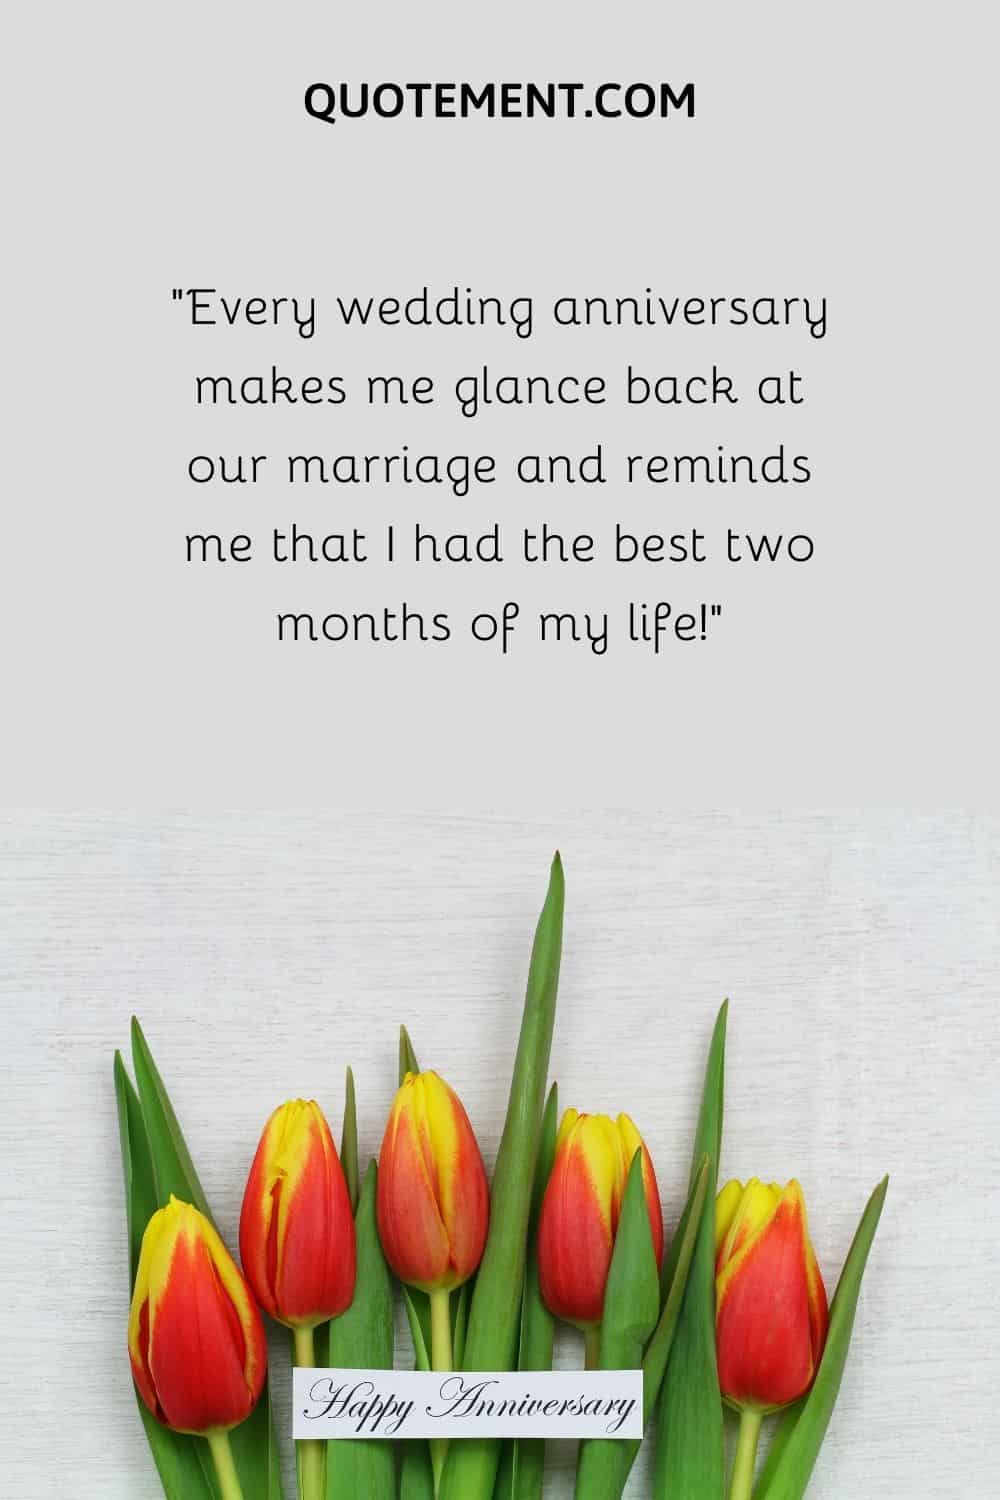 “Every wedding anniversary makes me glance back at our marriage and reminds me that I had the best two months of my life!”